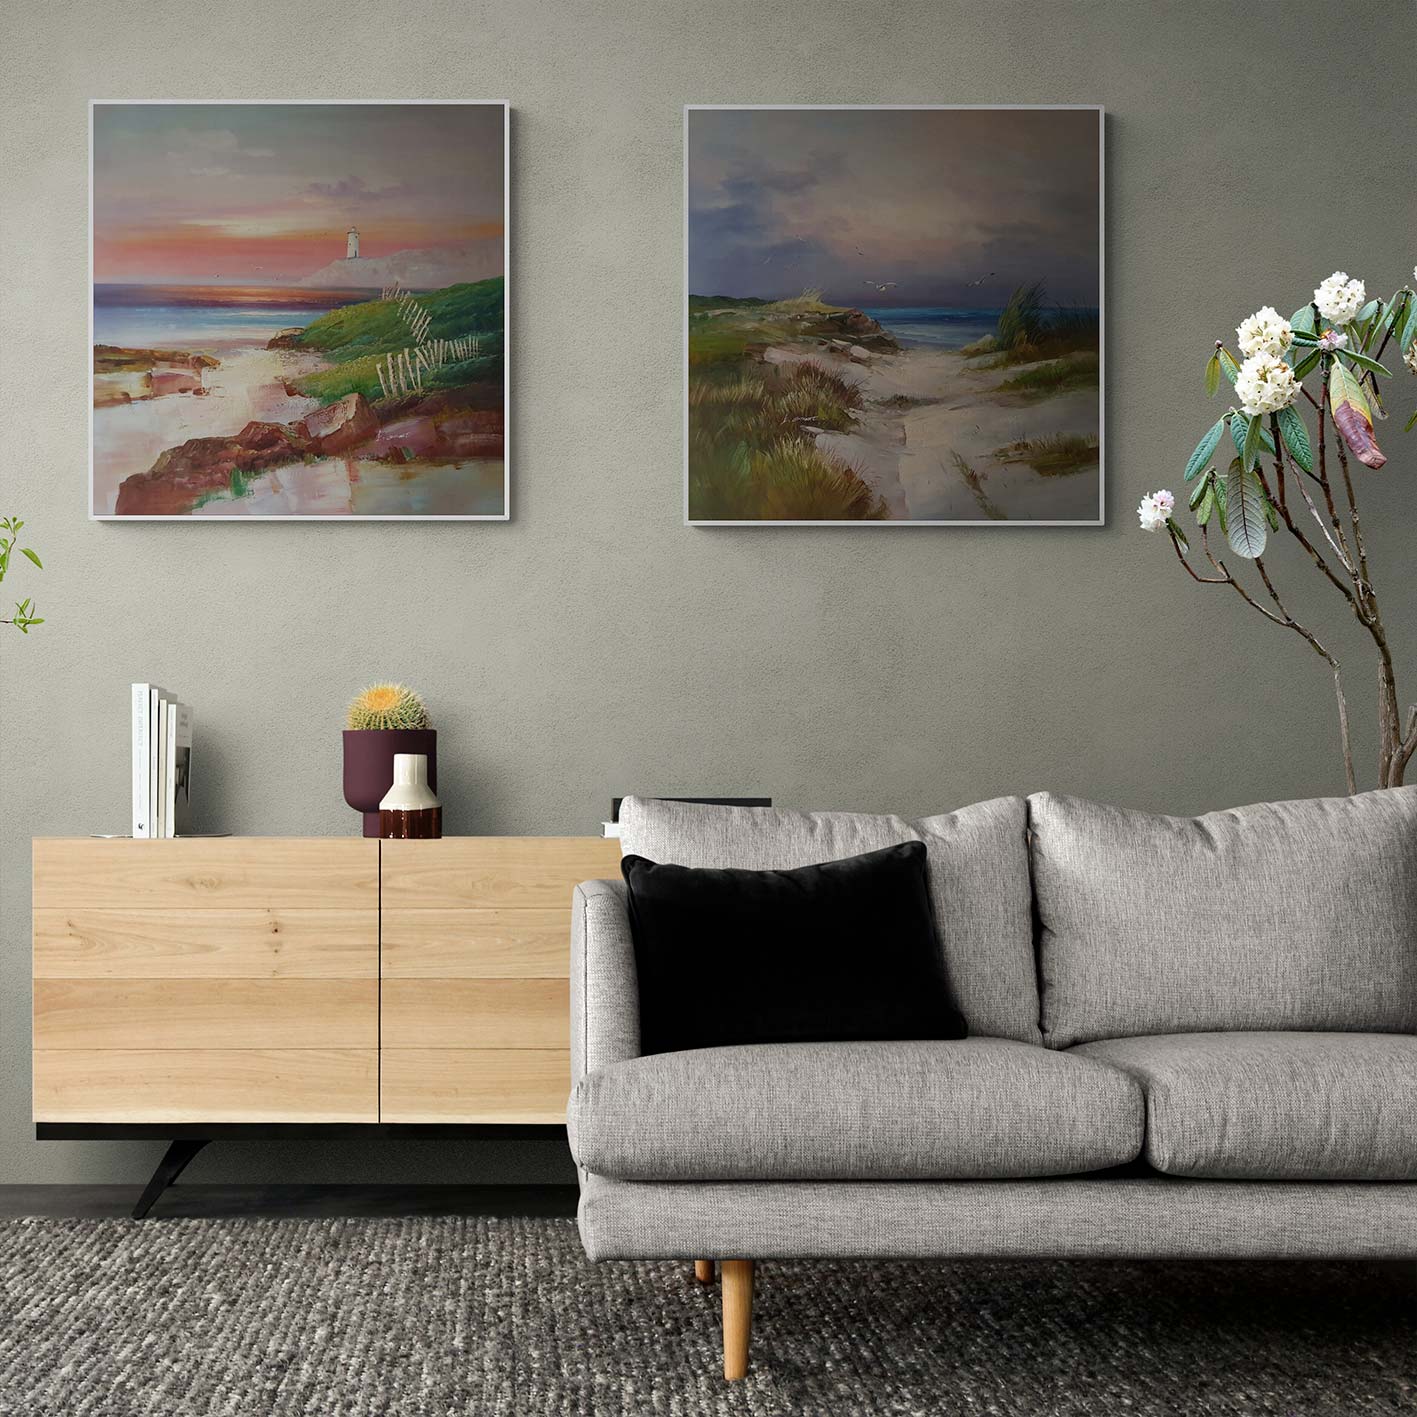 Marine and Dunes Diptych Painting 80x80 cm [2 pieces]